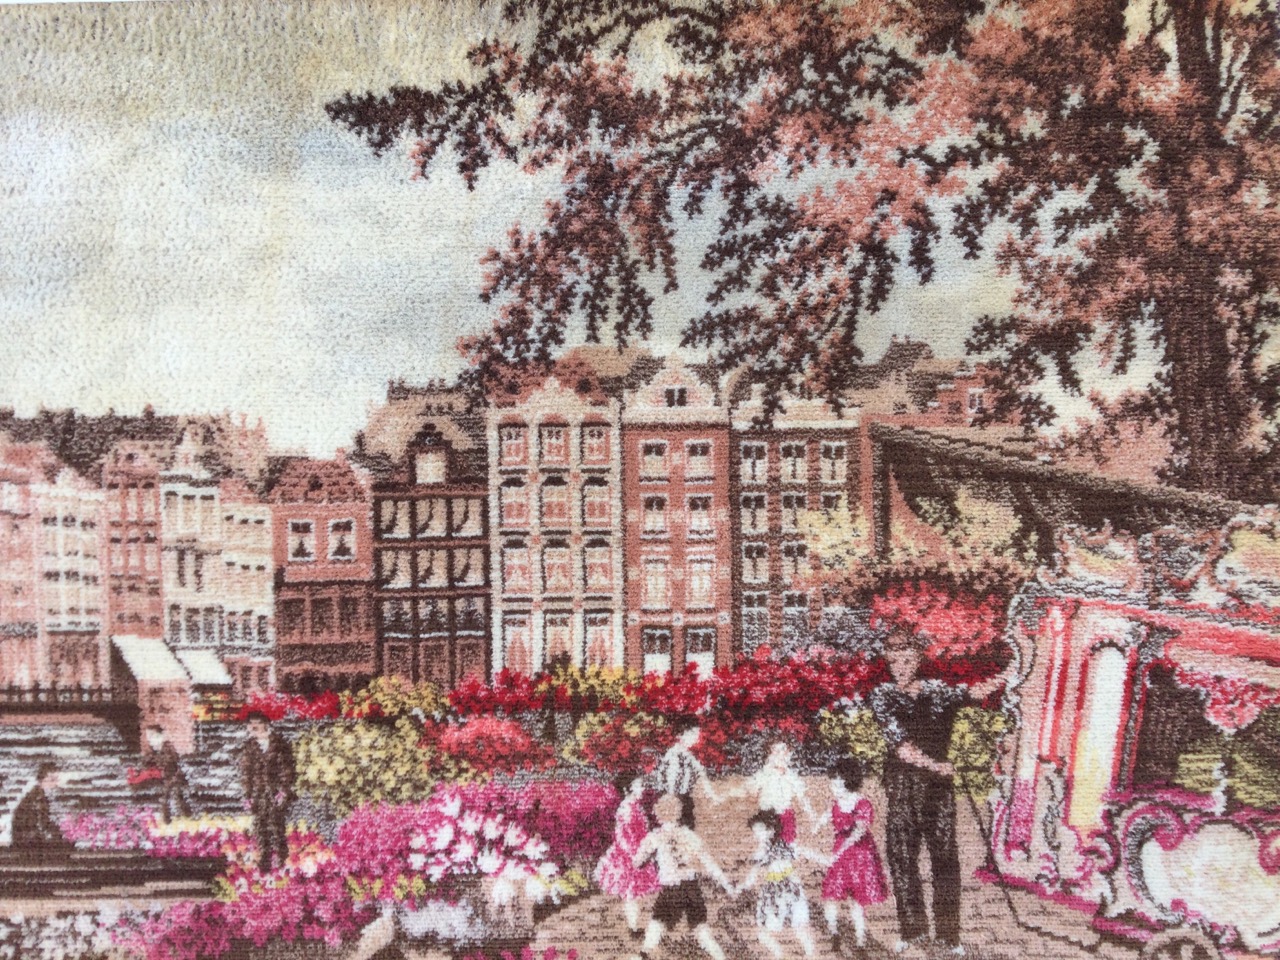 A framed rectangular woolwork tapestry of a Dutch city with flower sellers by waterside - Bruges? ( - Image 2 of 3